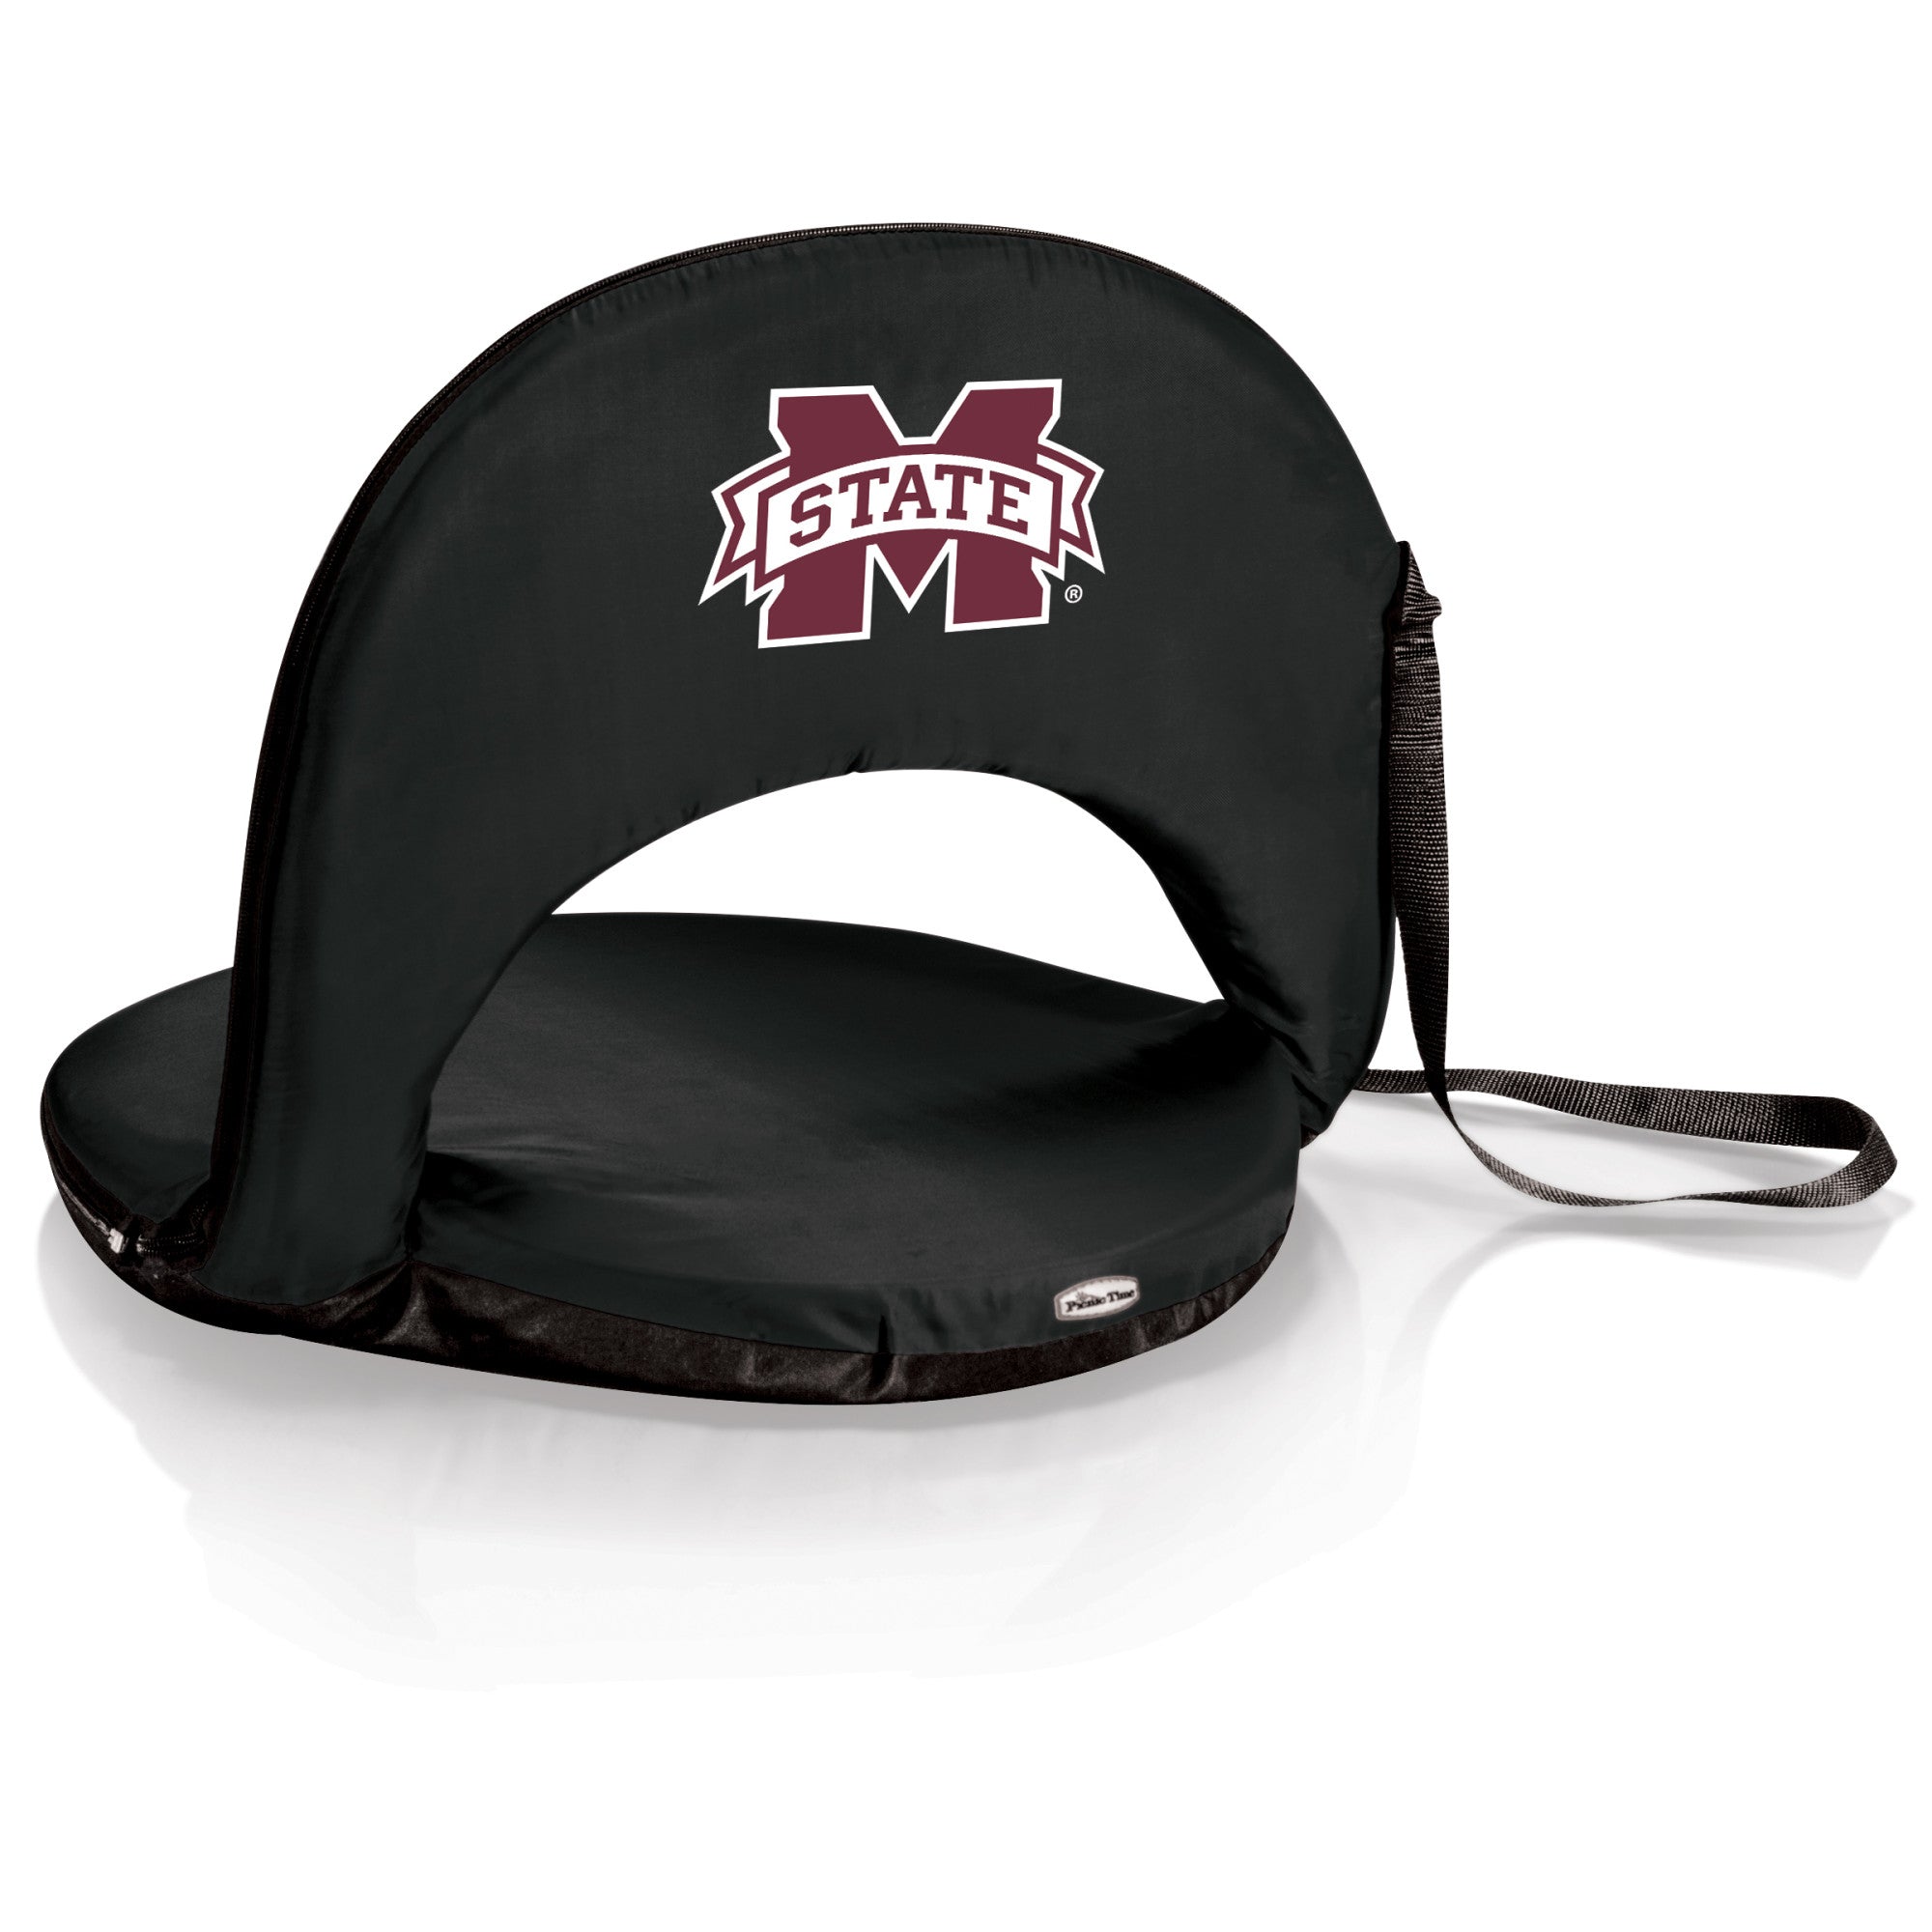 Mississippi State Bulldogs - Oniva Portable Reclining Seat